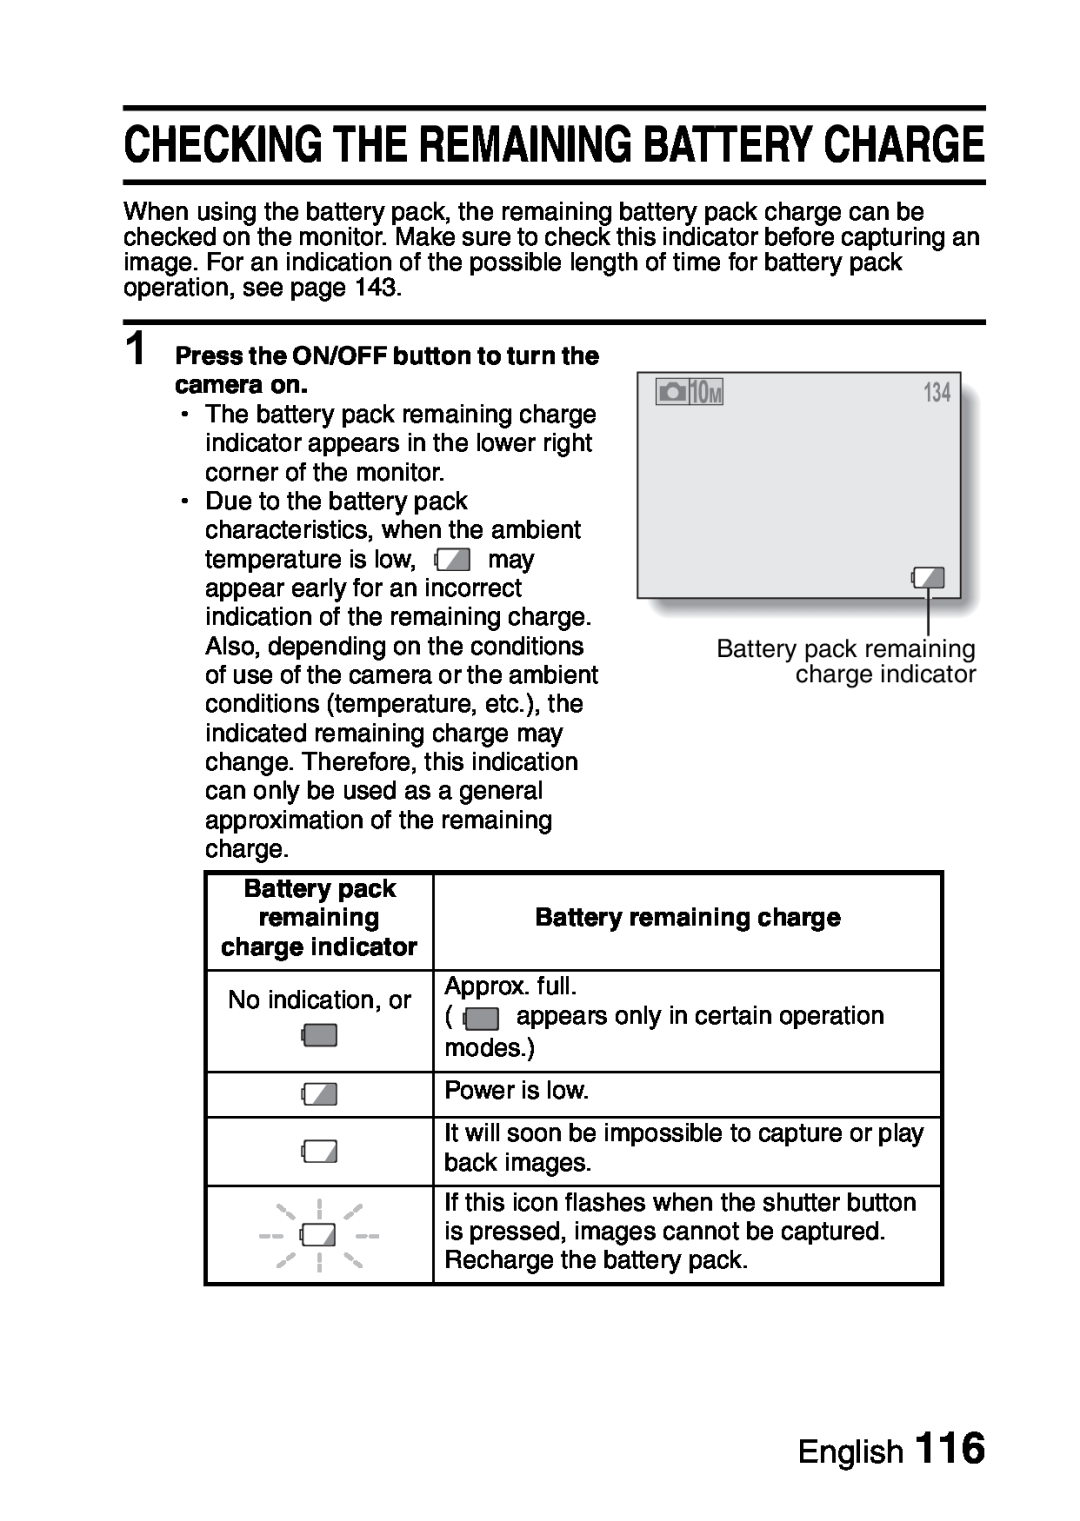 Samsung R50 Checking The Remaining Battery Charge, English, Press the ON/OFF button to turn the camera on, Battery pack 